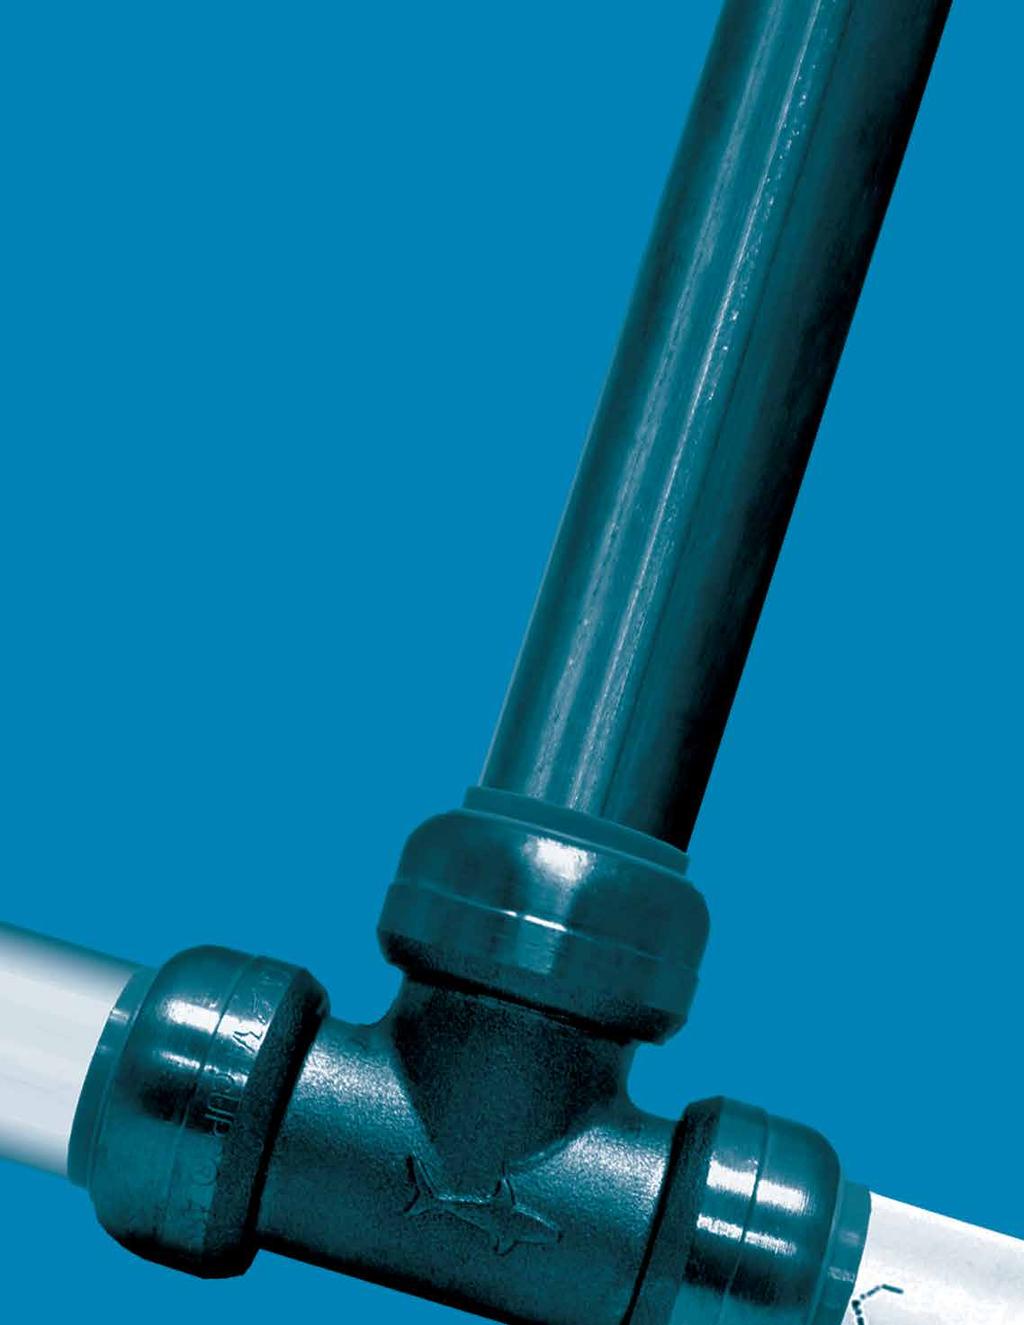 SHARKBITE PUSH-TO-CONNECT PRODUCTS The ultimate range of push-to-connect plumbing fittings the SharkBite Connection System has really taken hold with its ability to join Copper, CPVC, PEX or PE-RT